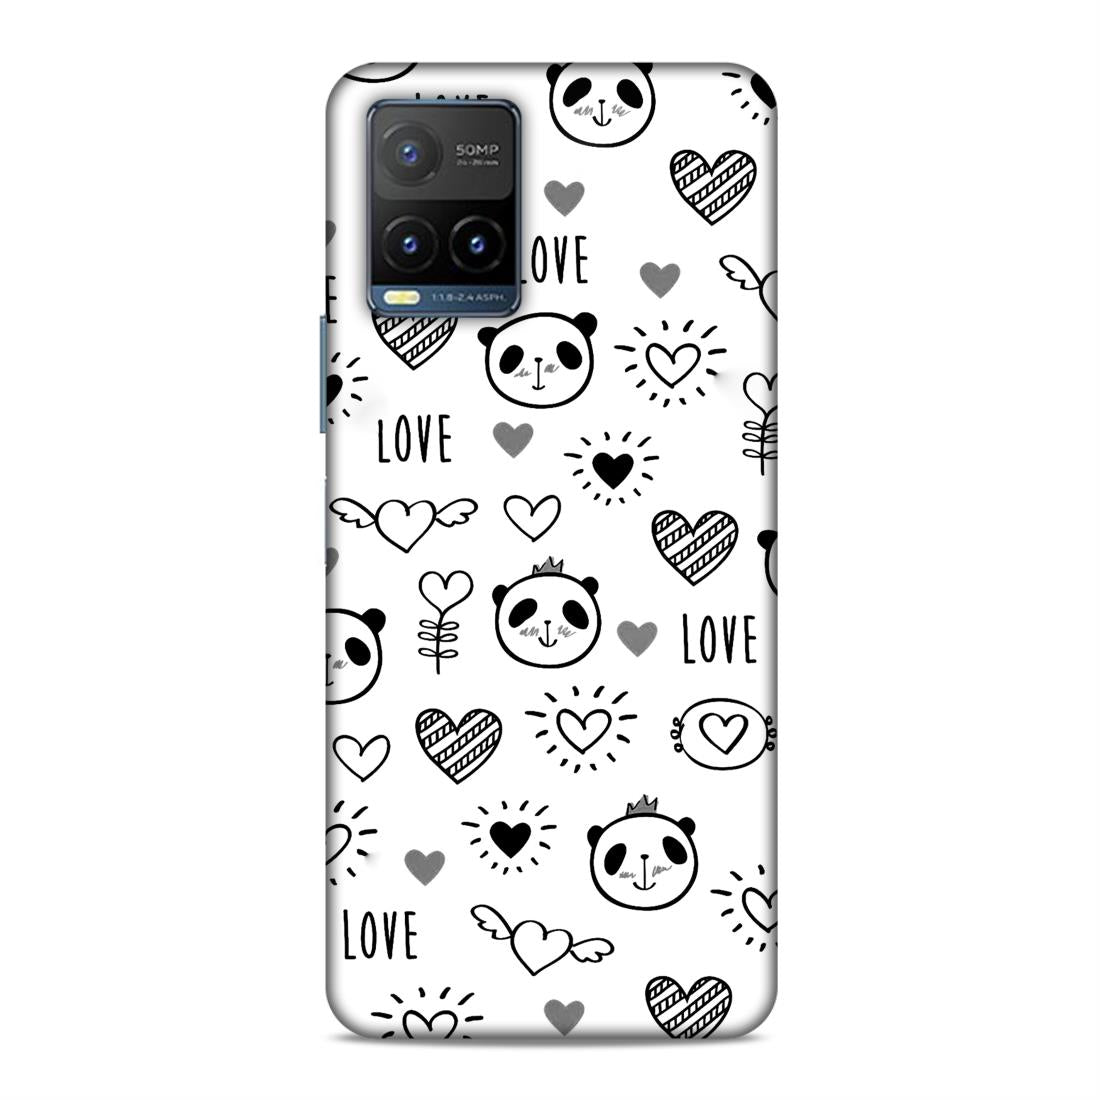 Heart Love and Panda Hard Back Case For Vivo Y21 2021 / Y21A / Y21e / Y21G / Y21s / Y21T / Y33T / Y33s